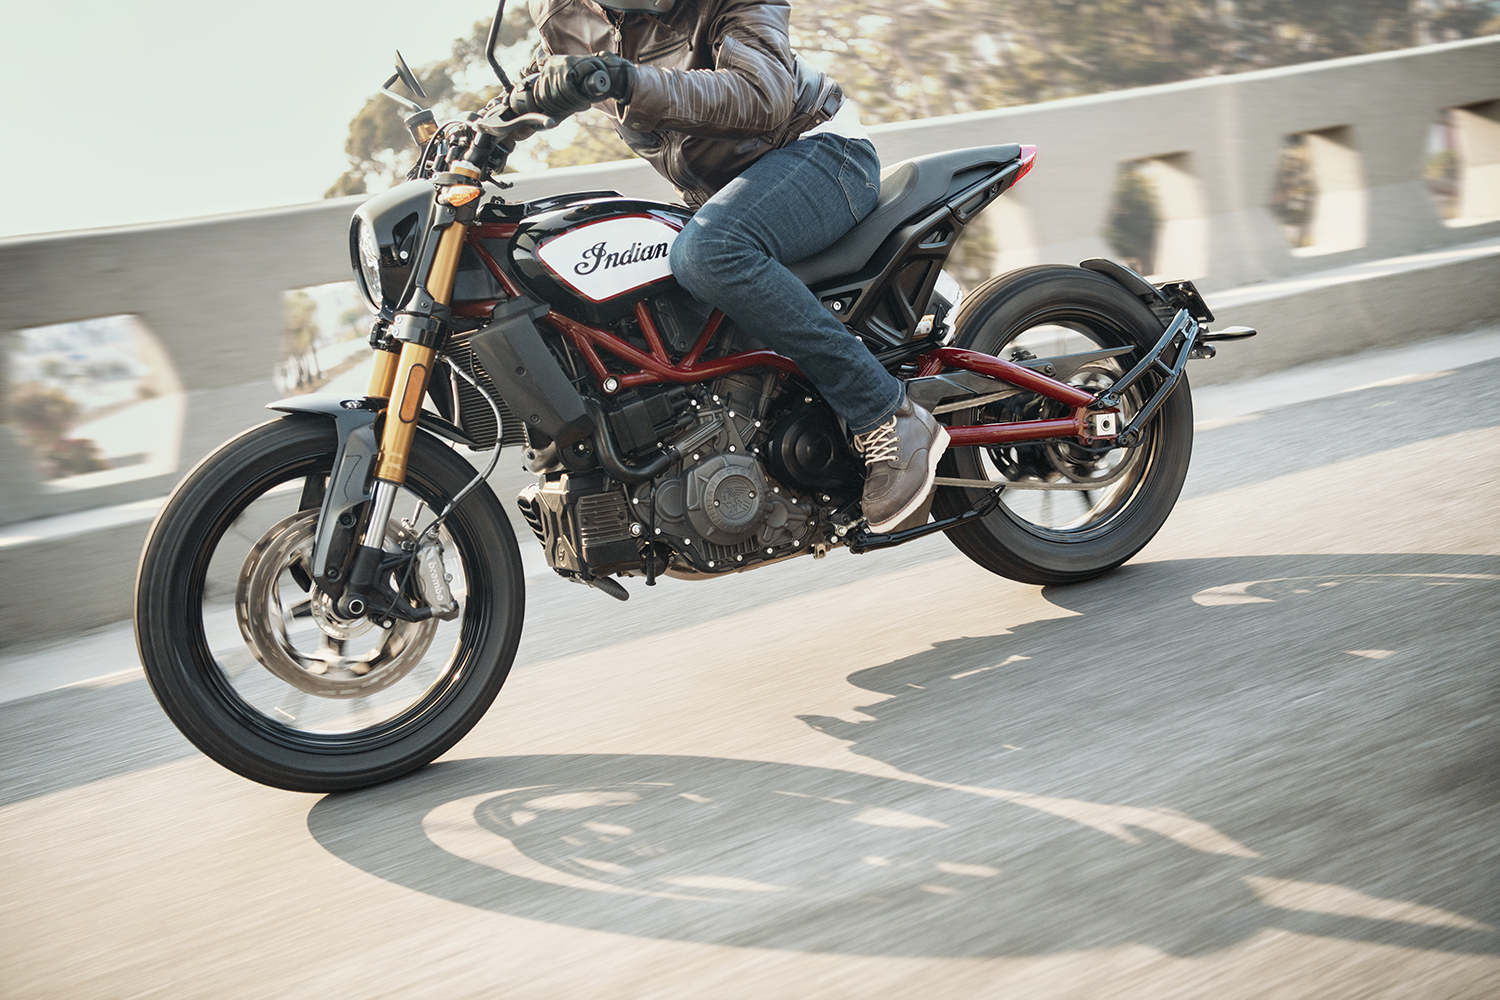 indian ftr 1200 1200s debut <entity>motorcycle</entity> 2019 14